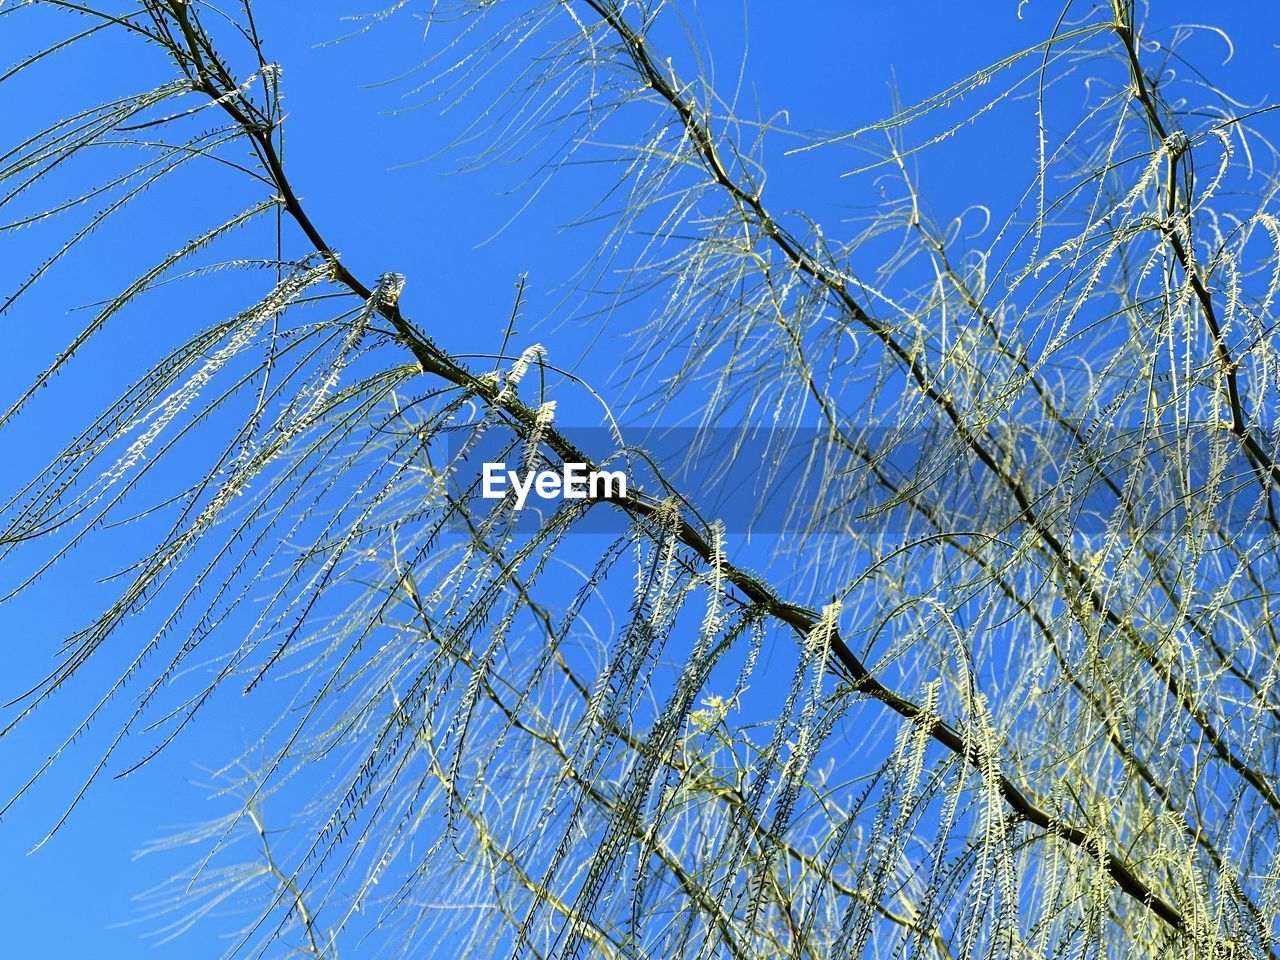 branch, sky, low angle view, tree, blue, no people, nature, plant, clear sky, day, frost, grass, outdoors, bare tree, beauty in nature, growth, twig, flower, tranquility, sunlight, leaf, winter, fence